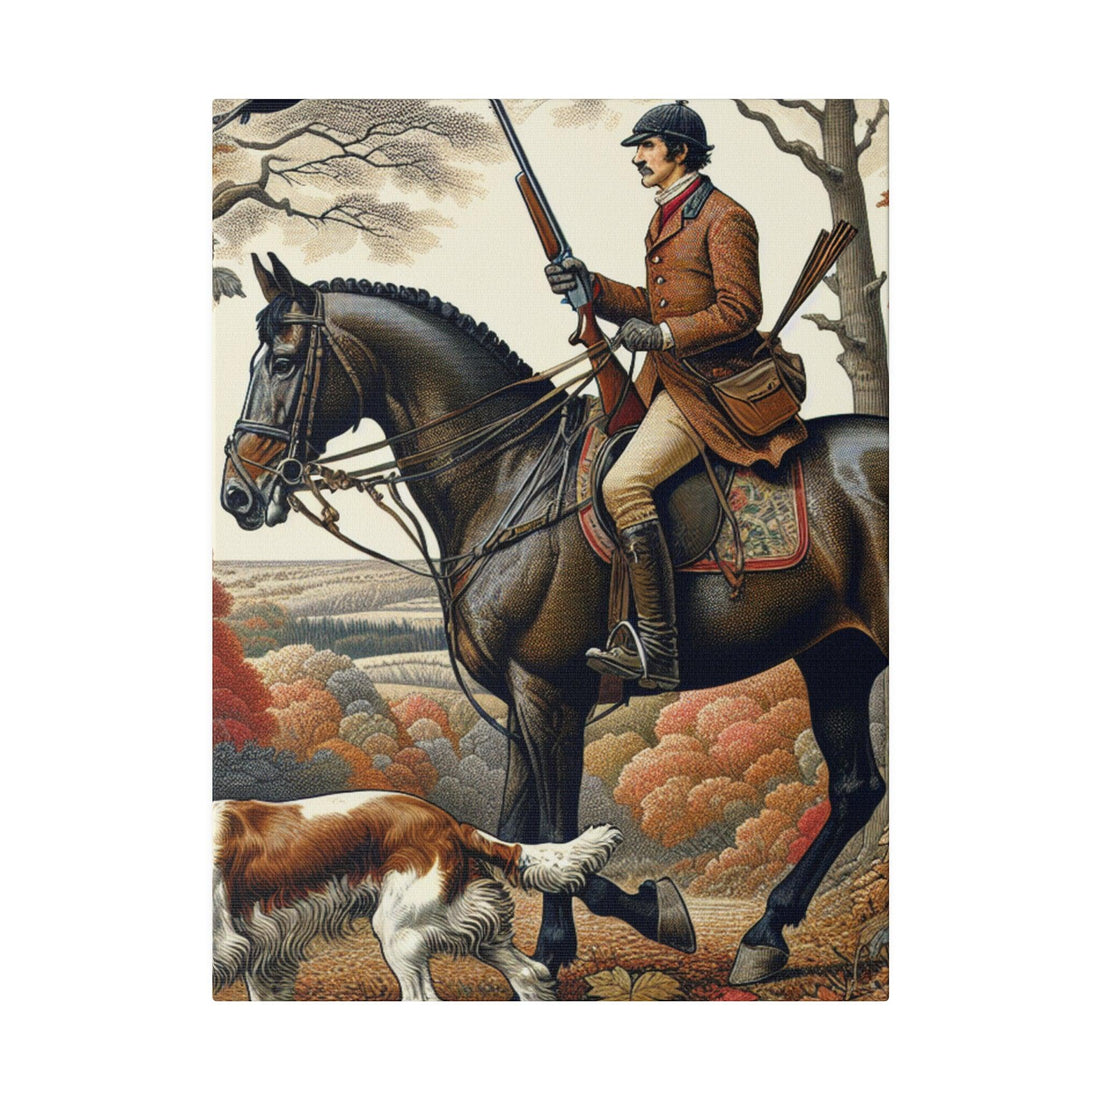 "Hunting Elegance: The Elite Canvas Wall Art" - The Alice Gallery